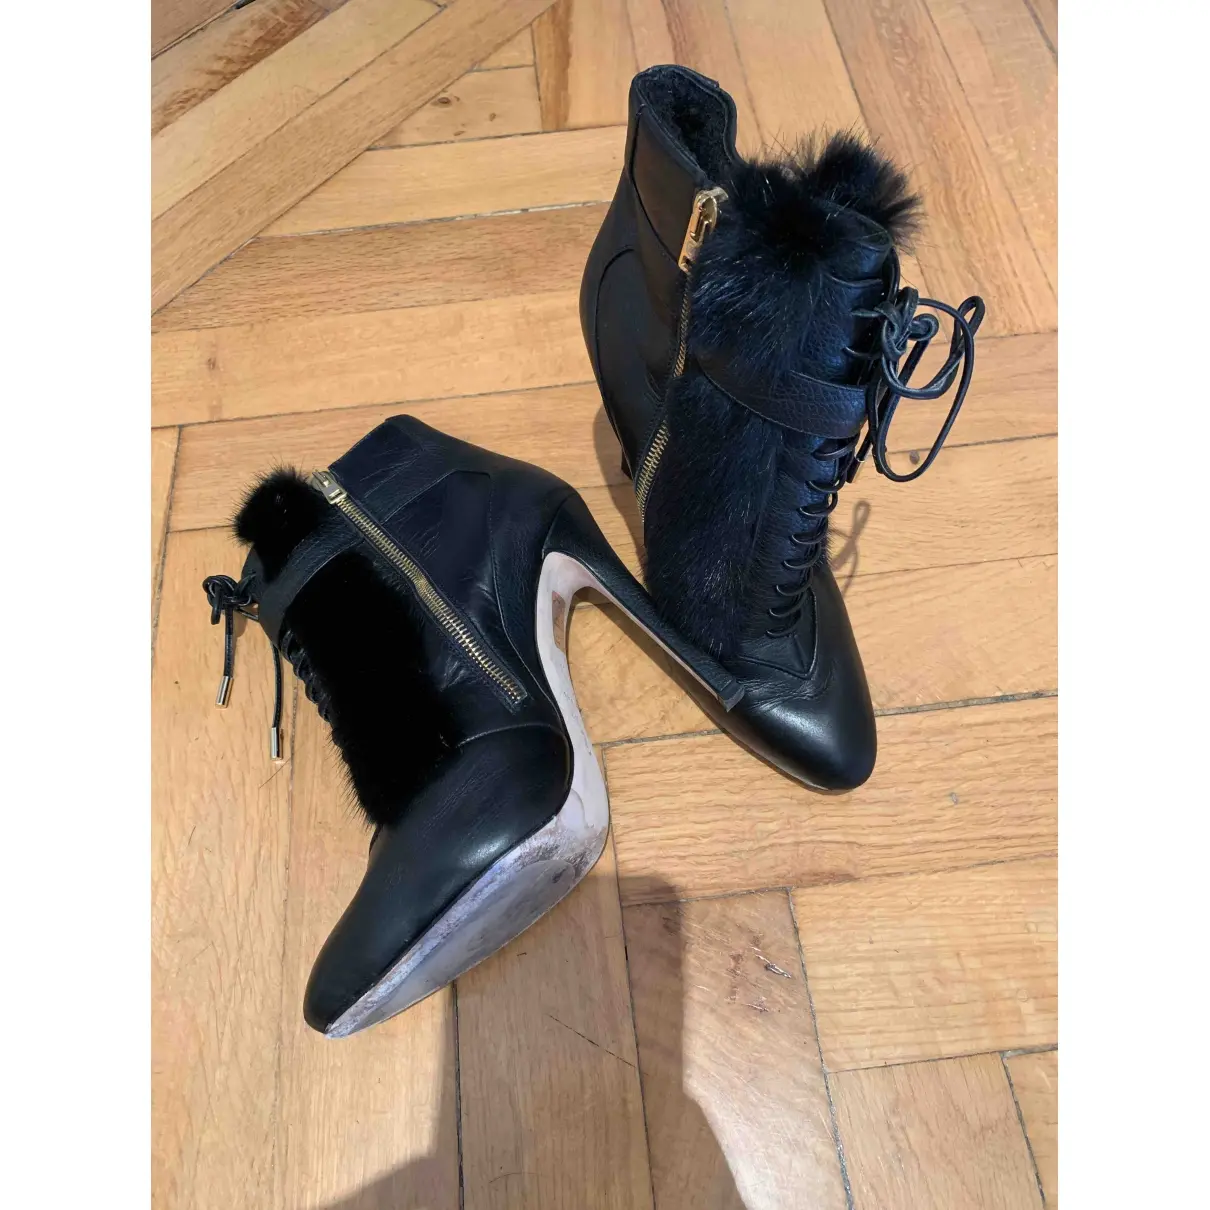 Elie Saab Leather lace up boots for sale